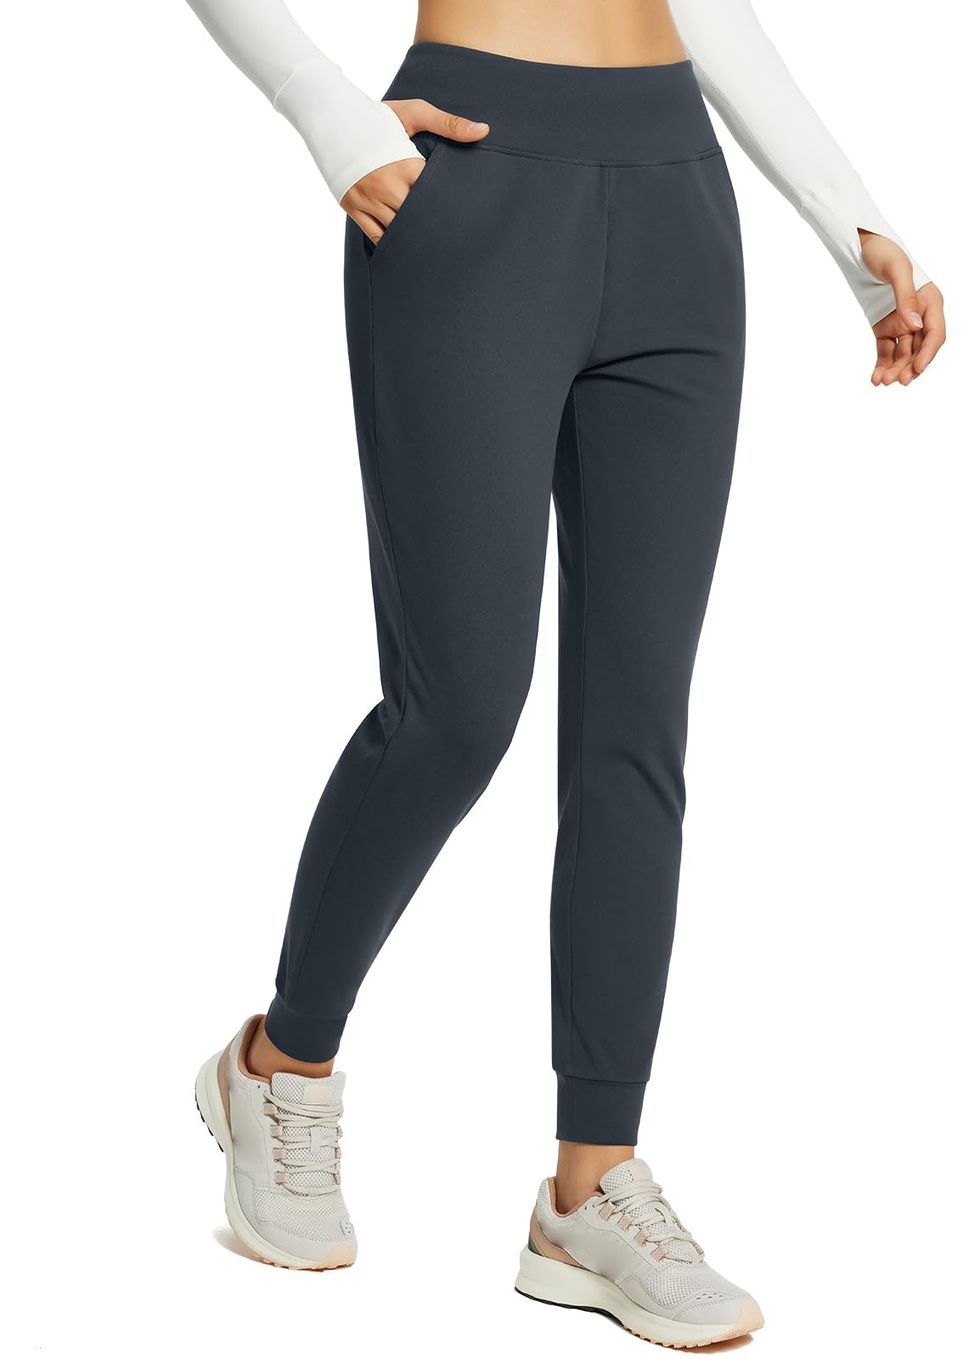 Best Cold Weather Running Clothes for Women - Psycho Wyco